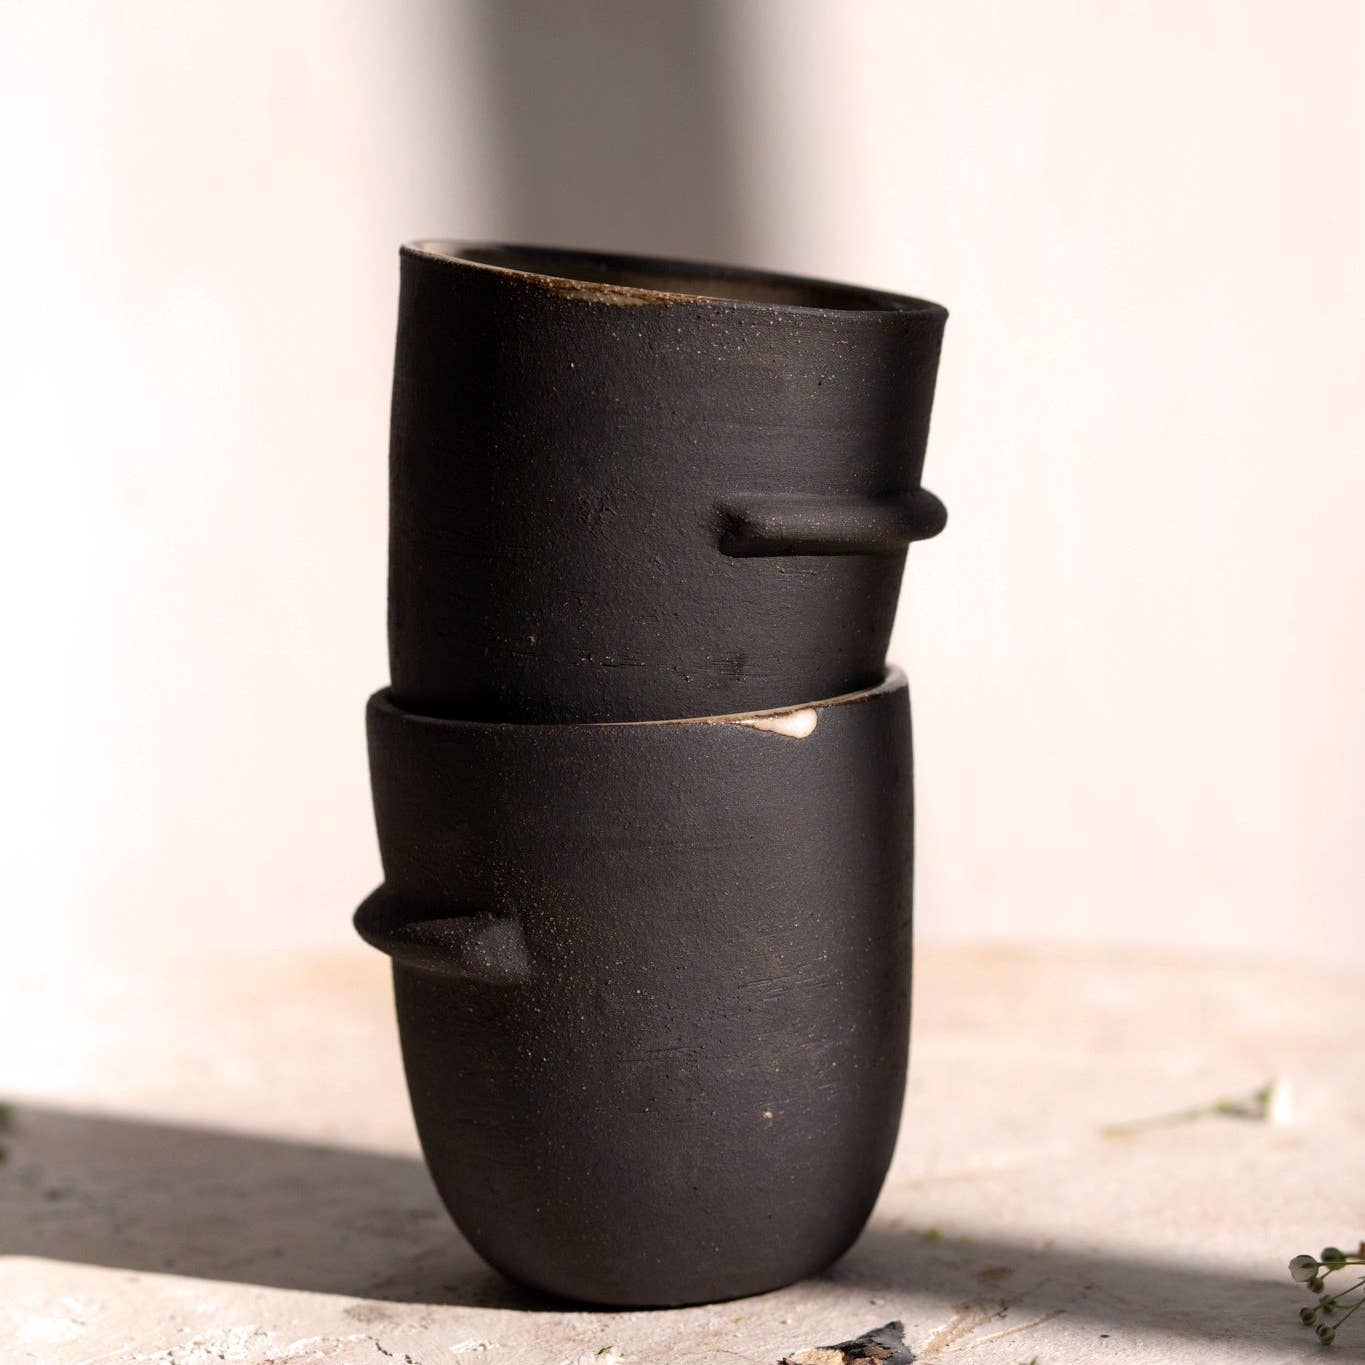 good hearted woman / Sleek tumbler featuring a ledge halfway round. Perfect for small drinks and small hands. Raw black stoneware exterior, white glazed interior. Handmade in Denver, CO.